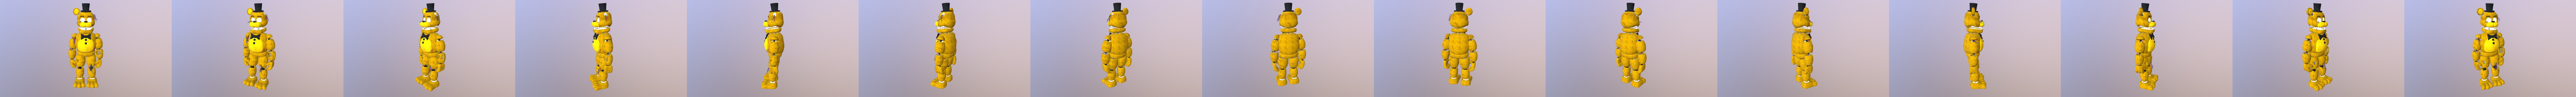 FNaF 2 Withered Freddy - Download Free 3D model by lissandroamorarios  (@lissandroamorarios) [0e0e214]